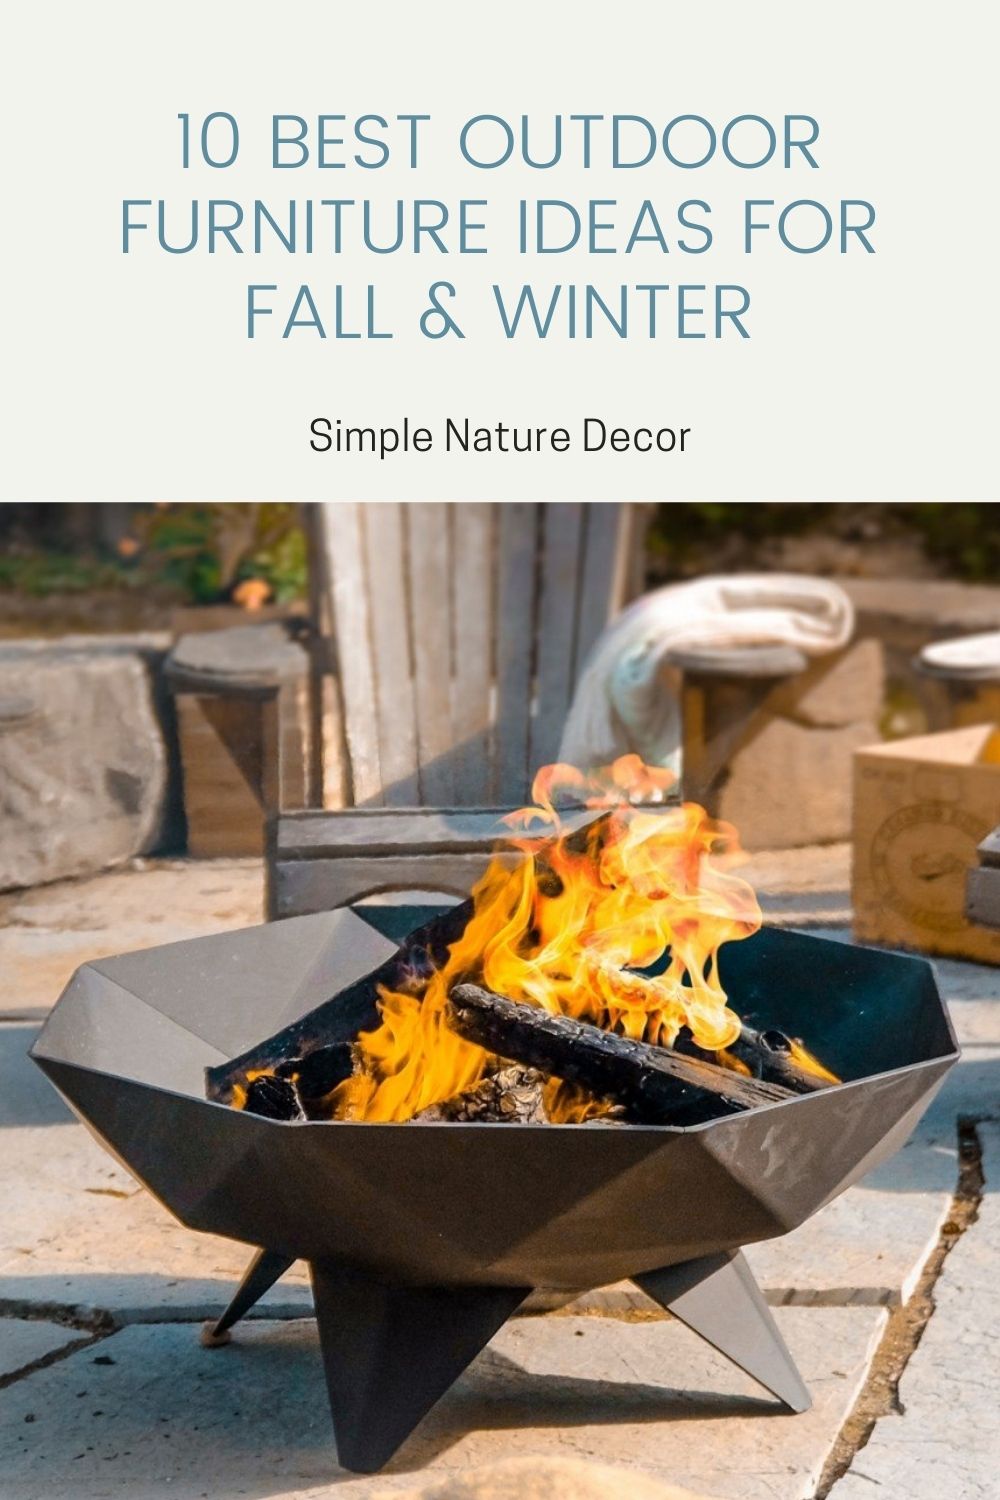 OUTDOOR FURNITURE IDEAS FOR THE FALL